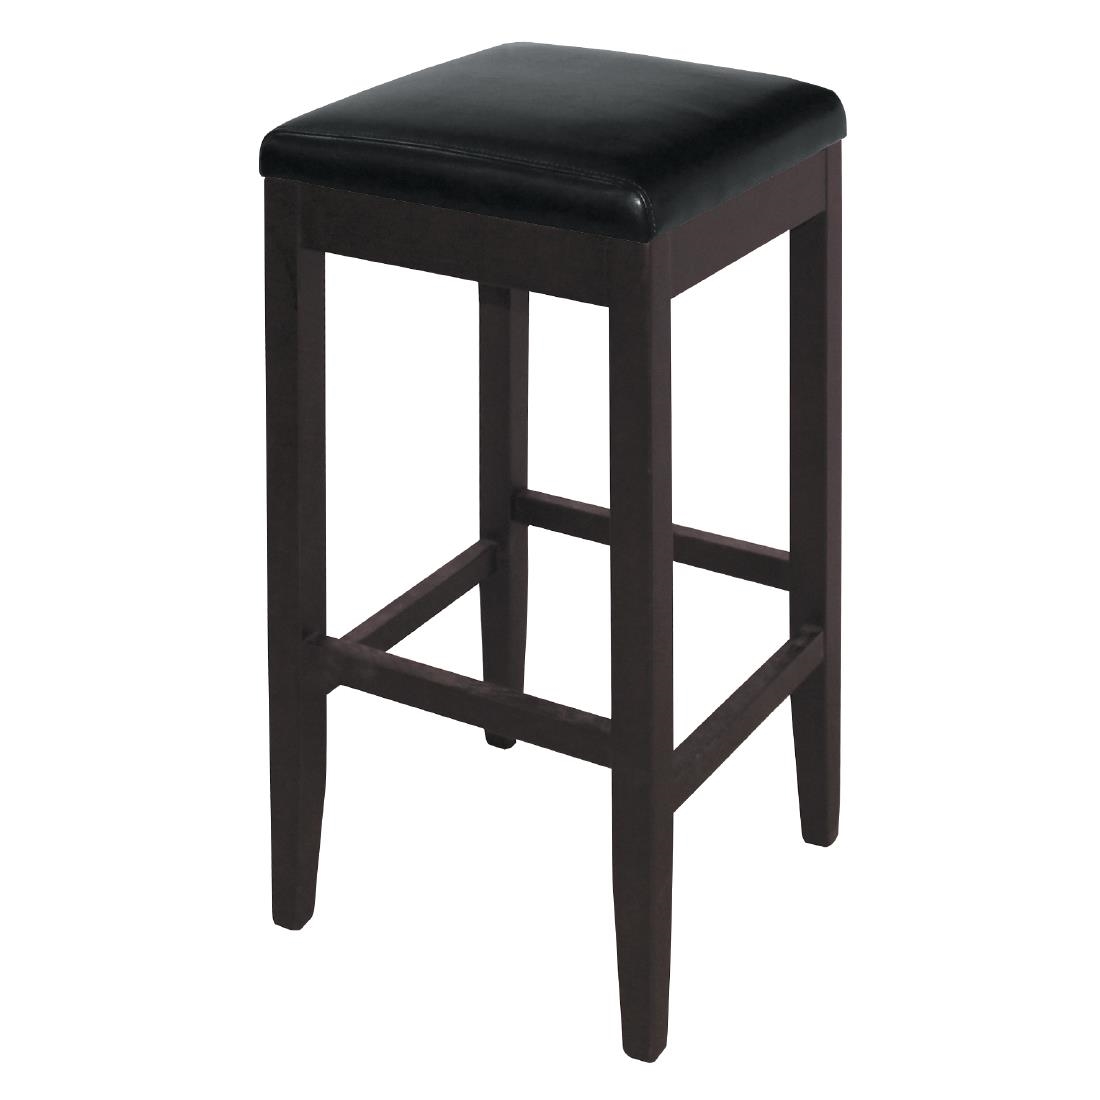 Faux Leather High Stool - Black